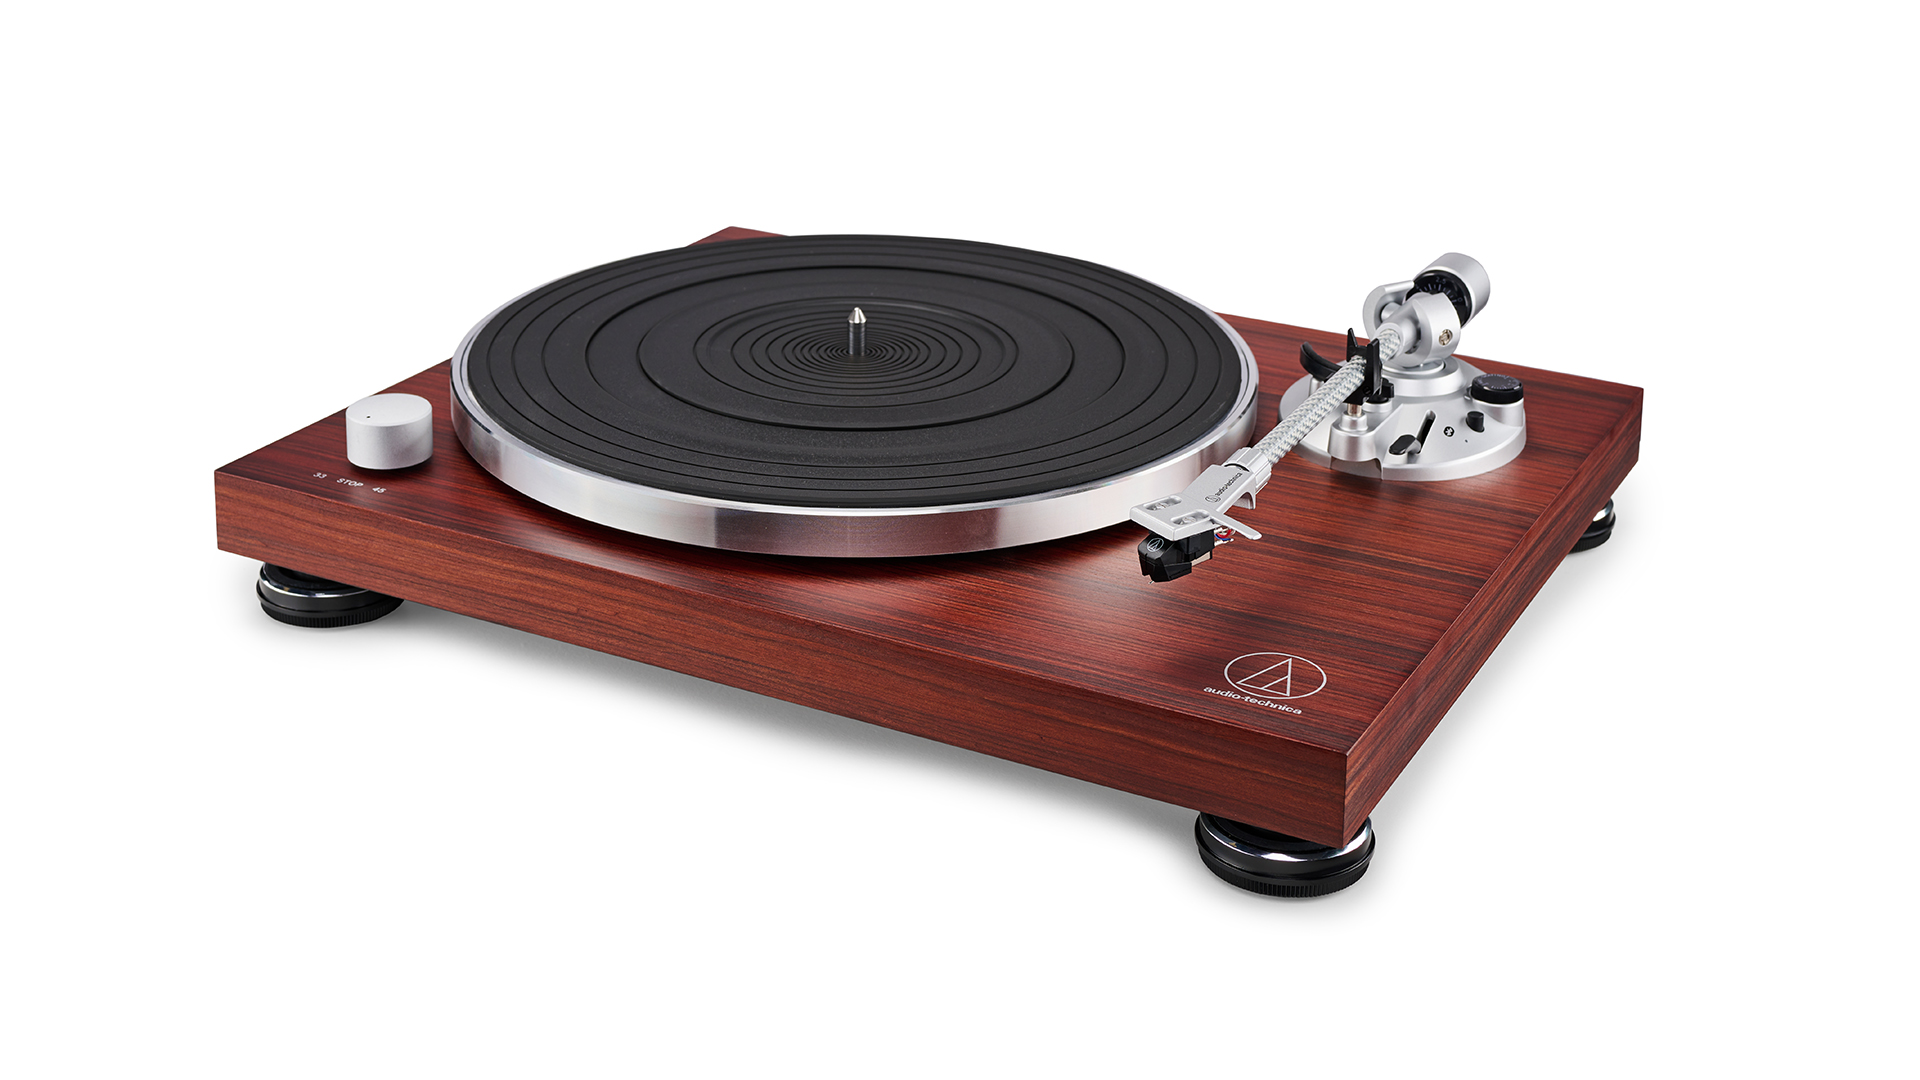 Audio Technica AT-LPW50BTRW: appealing turntable with fine features and  sound